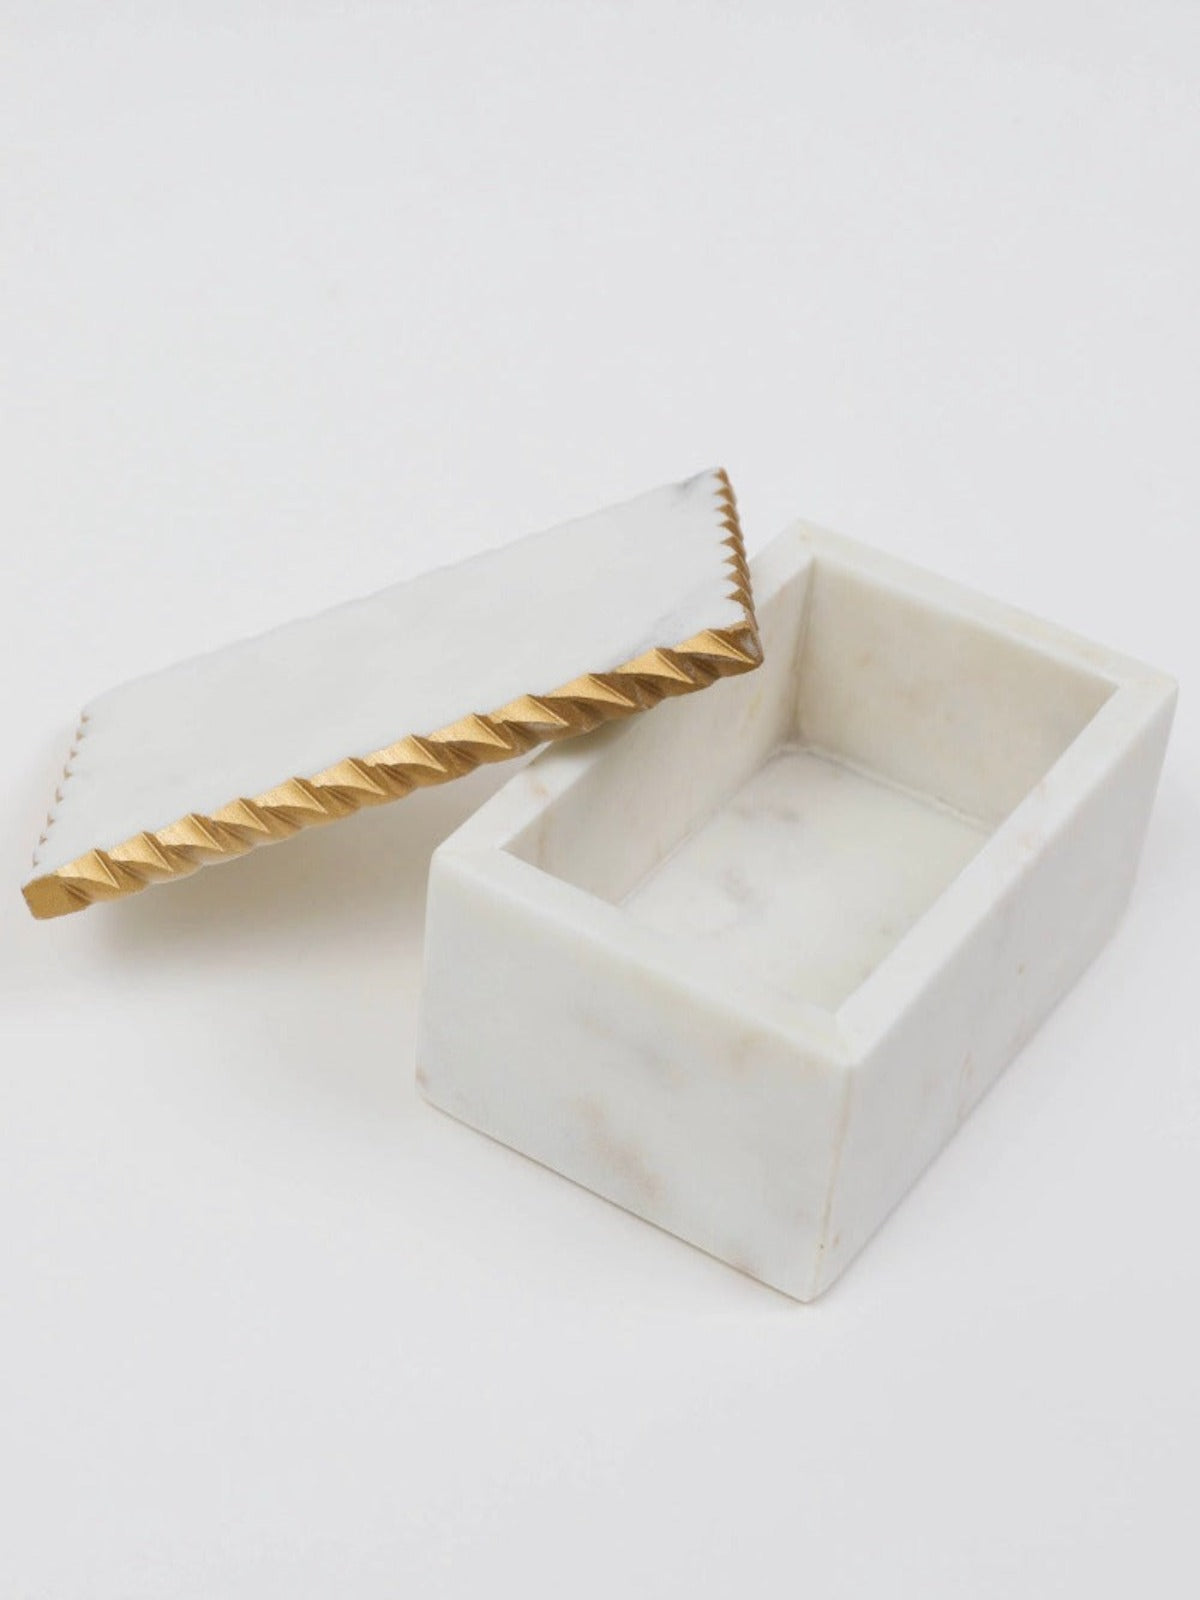 White Marble Decorative Box With Gold Edge.